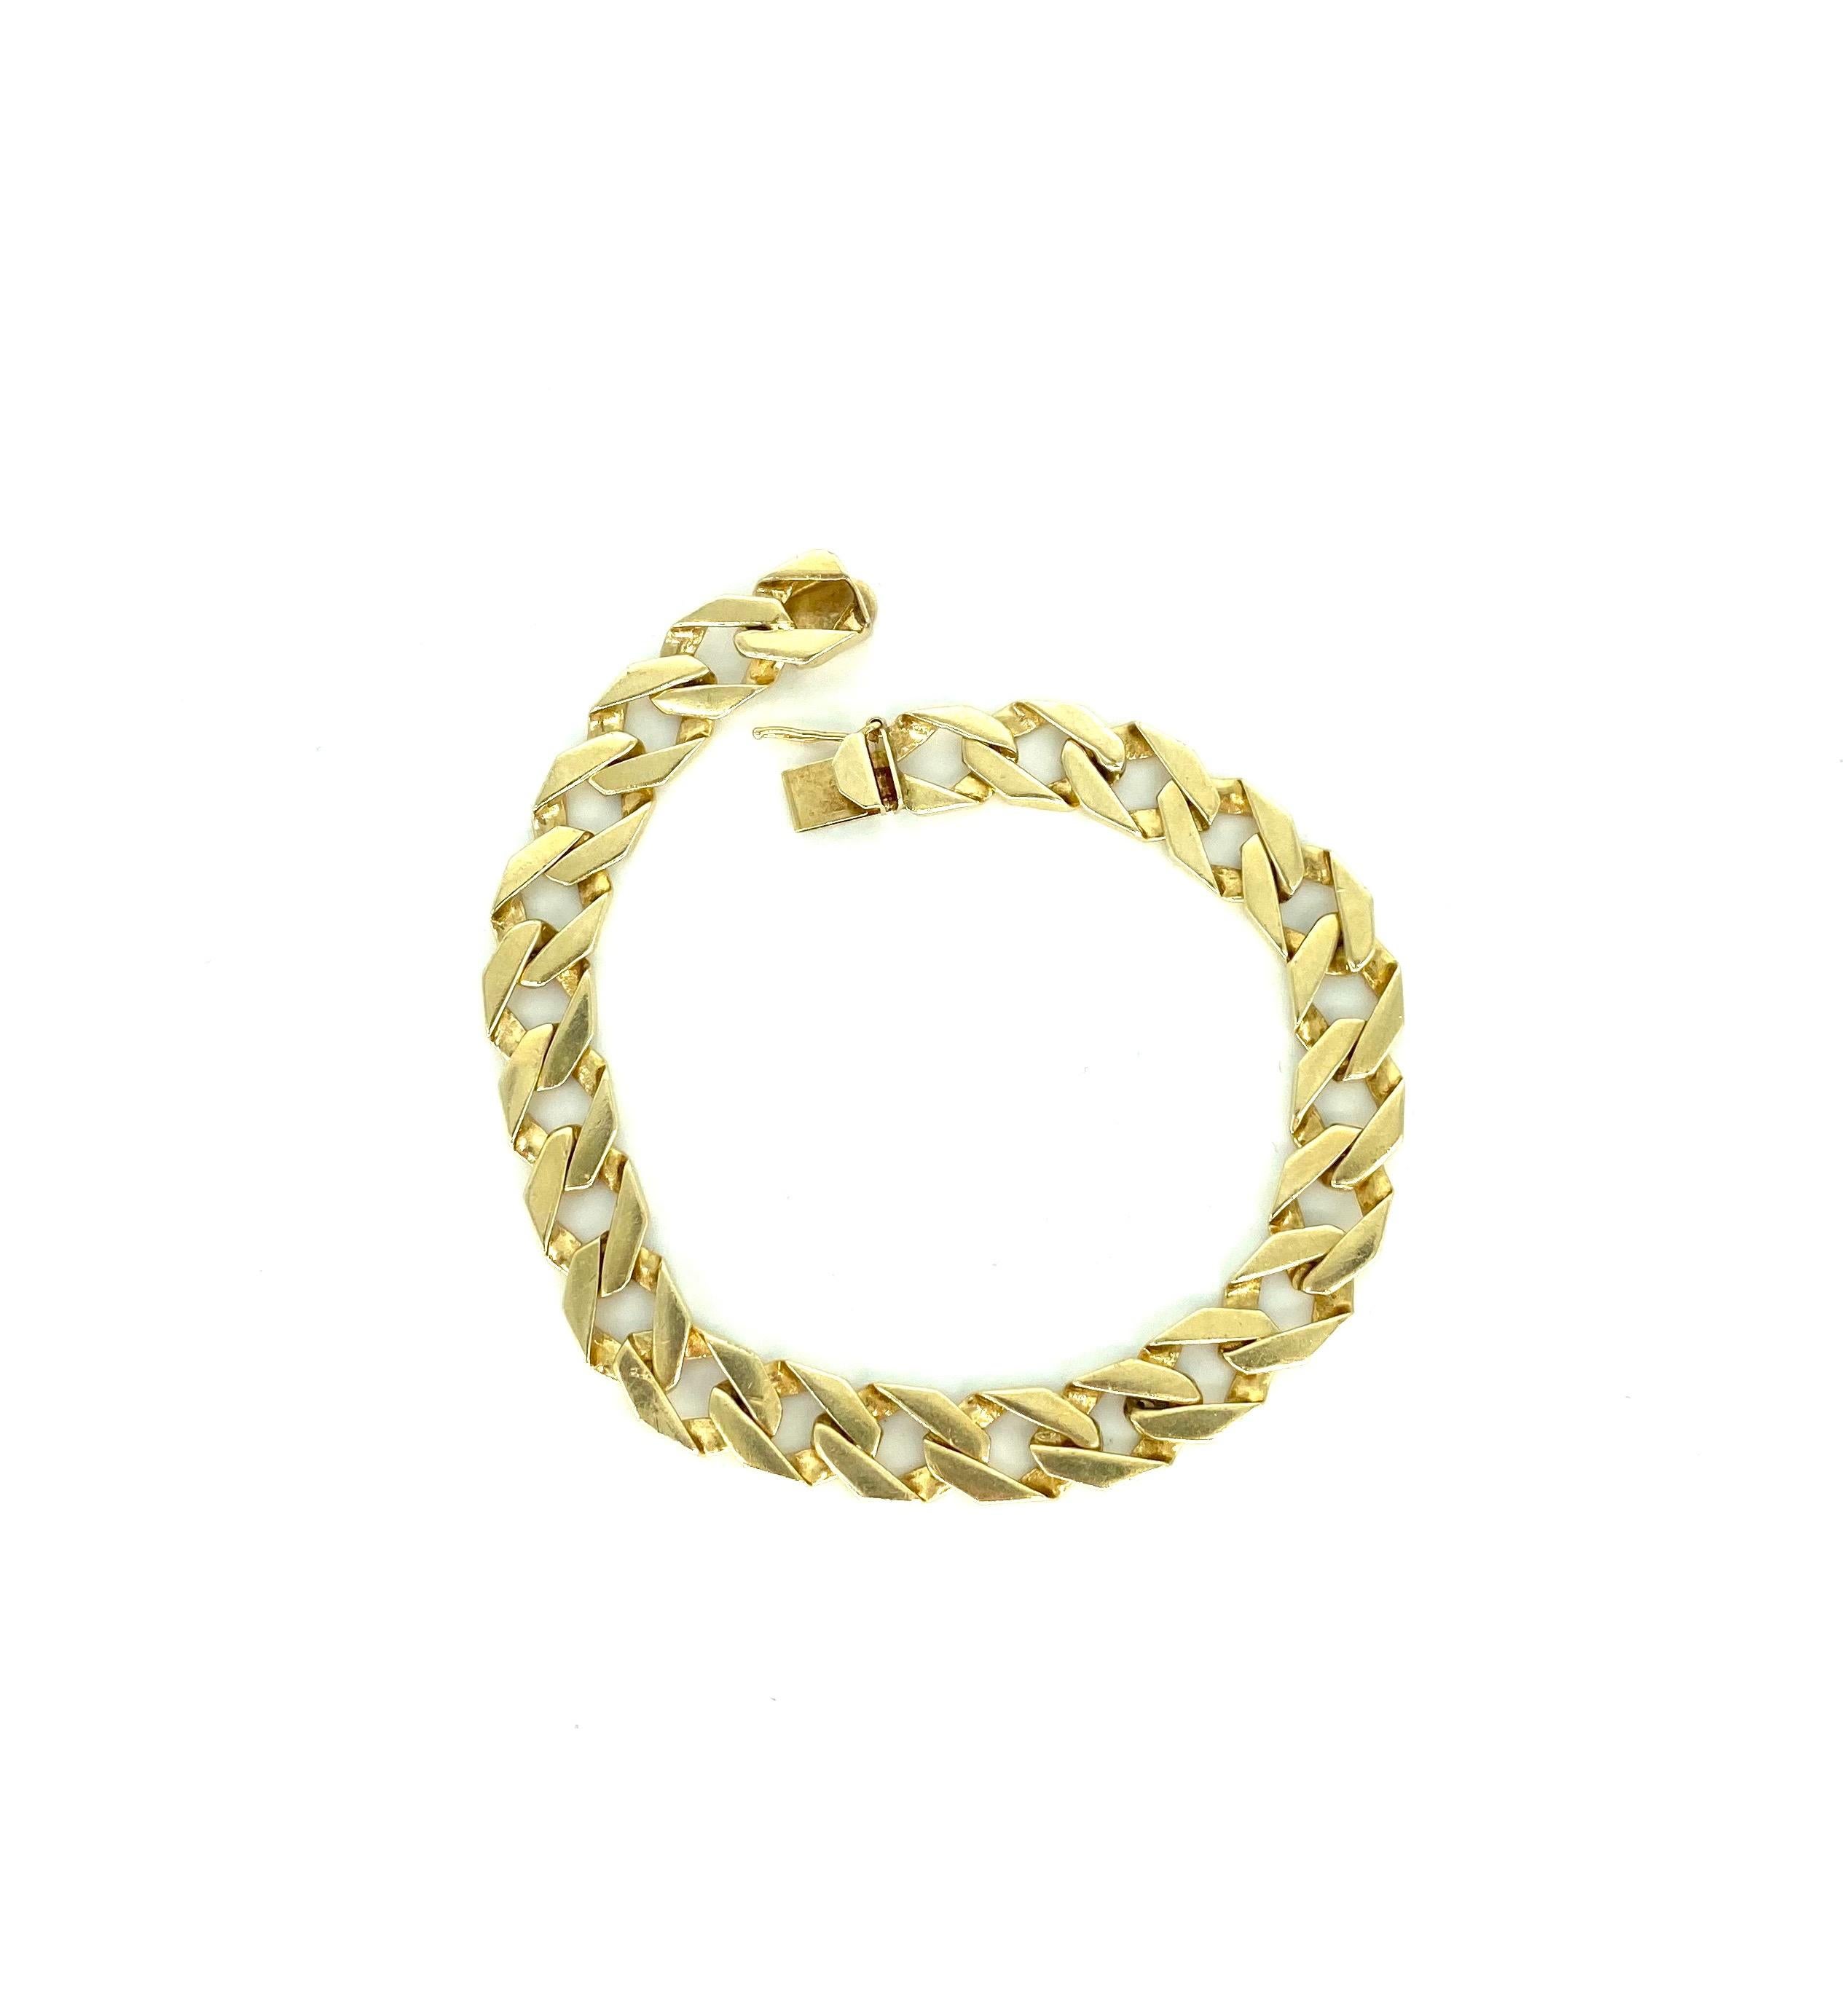 Vintage Men’s 9mm Fancy Curbed Cuban Link Bracelet 14k Gold
The bracelet is 8 inches long and is solid gold with a total weight of 29.6 grams 14k solid yellow gold. There is a stamp of 14k and also a Star on the lock. The width of the bracelet is